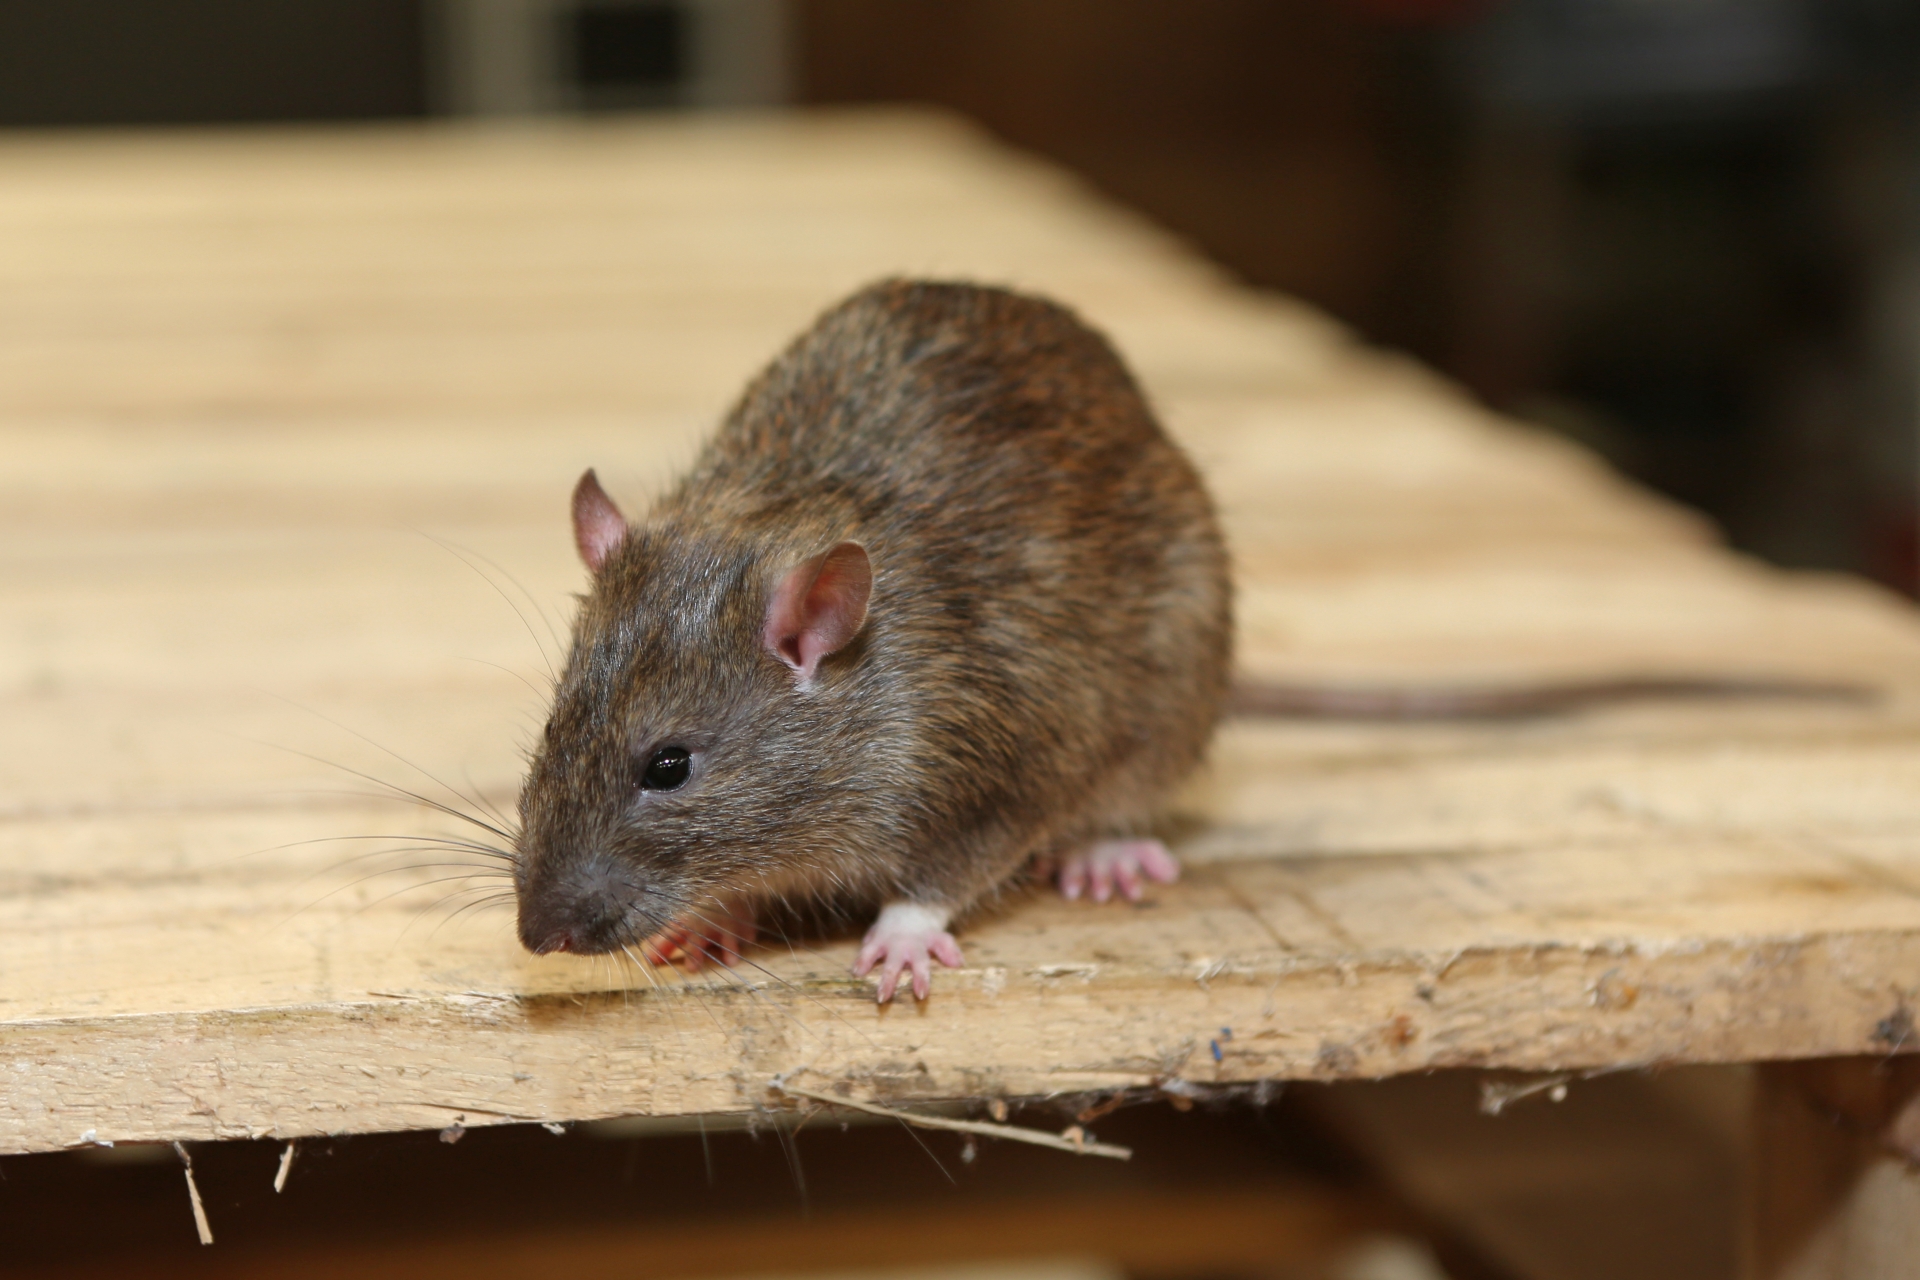 Rat Infestation, Pest Control in Chingford, Highams Park, E4. Call Now 020 8166 9746